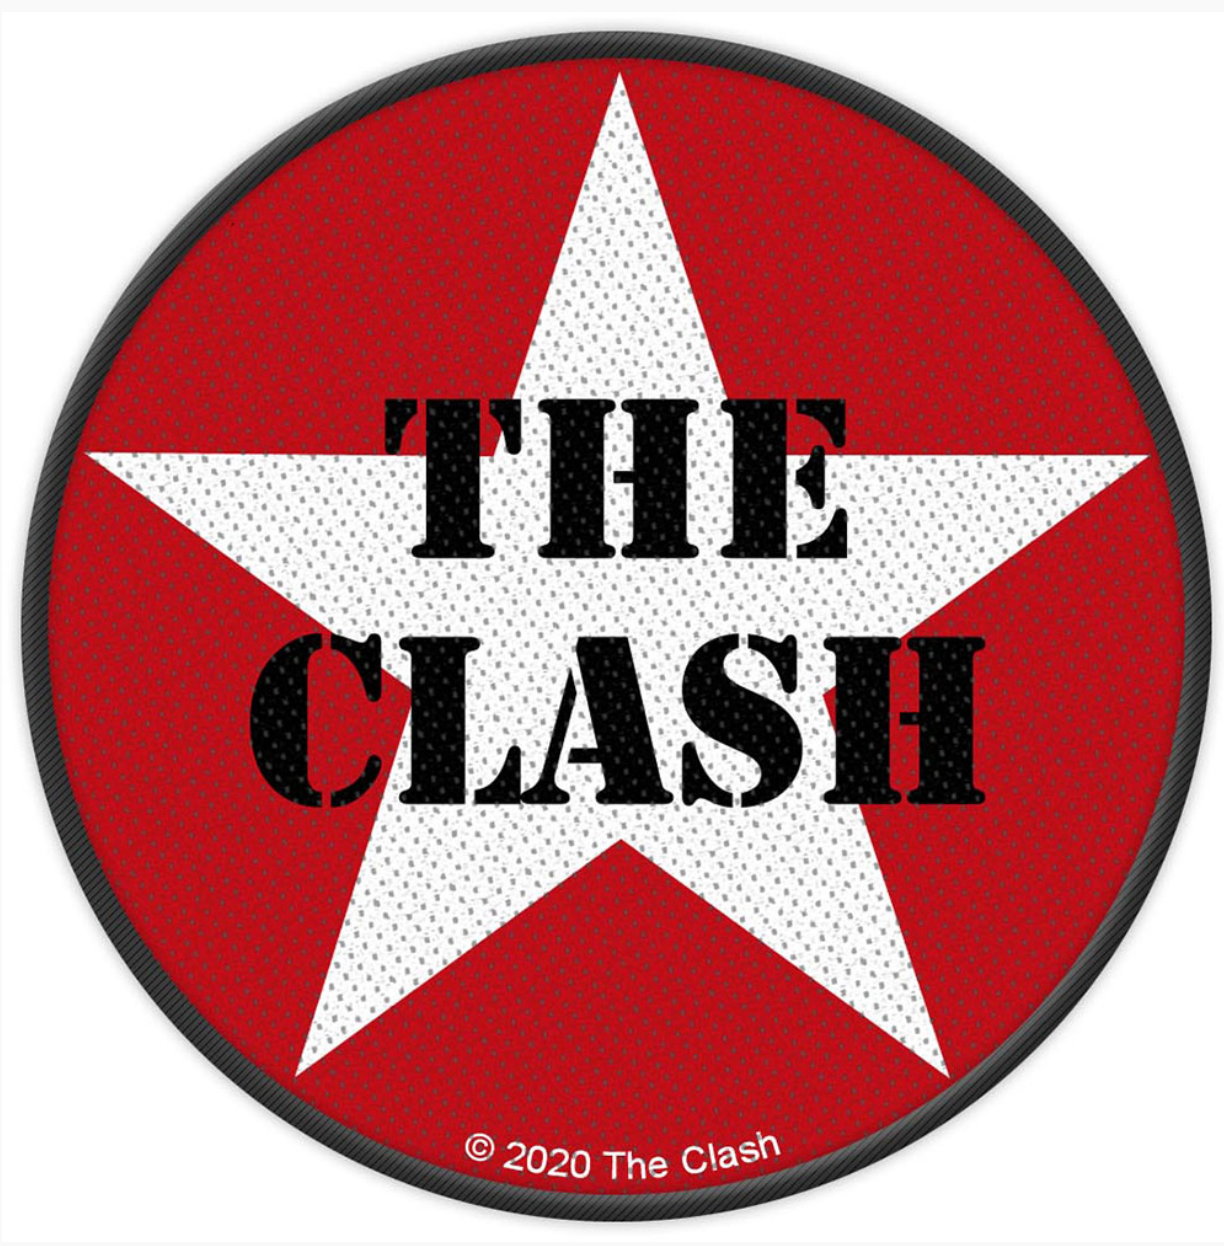 The Clash Star Logo 3.5" Round Patch